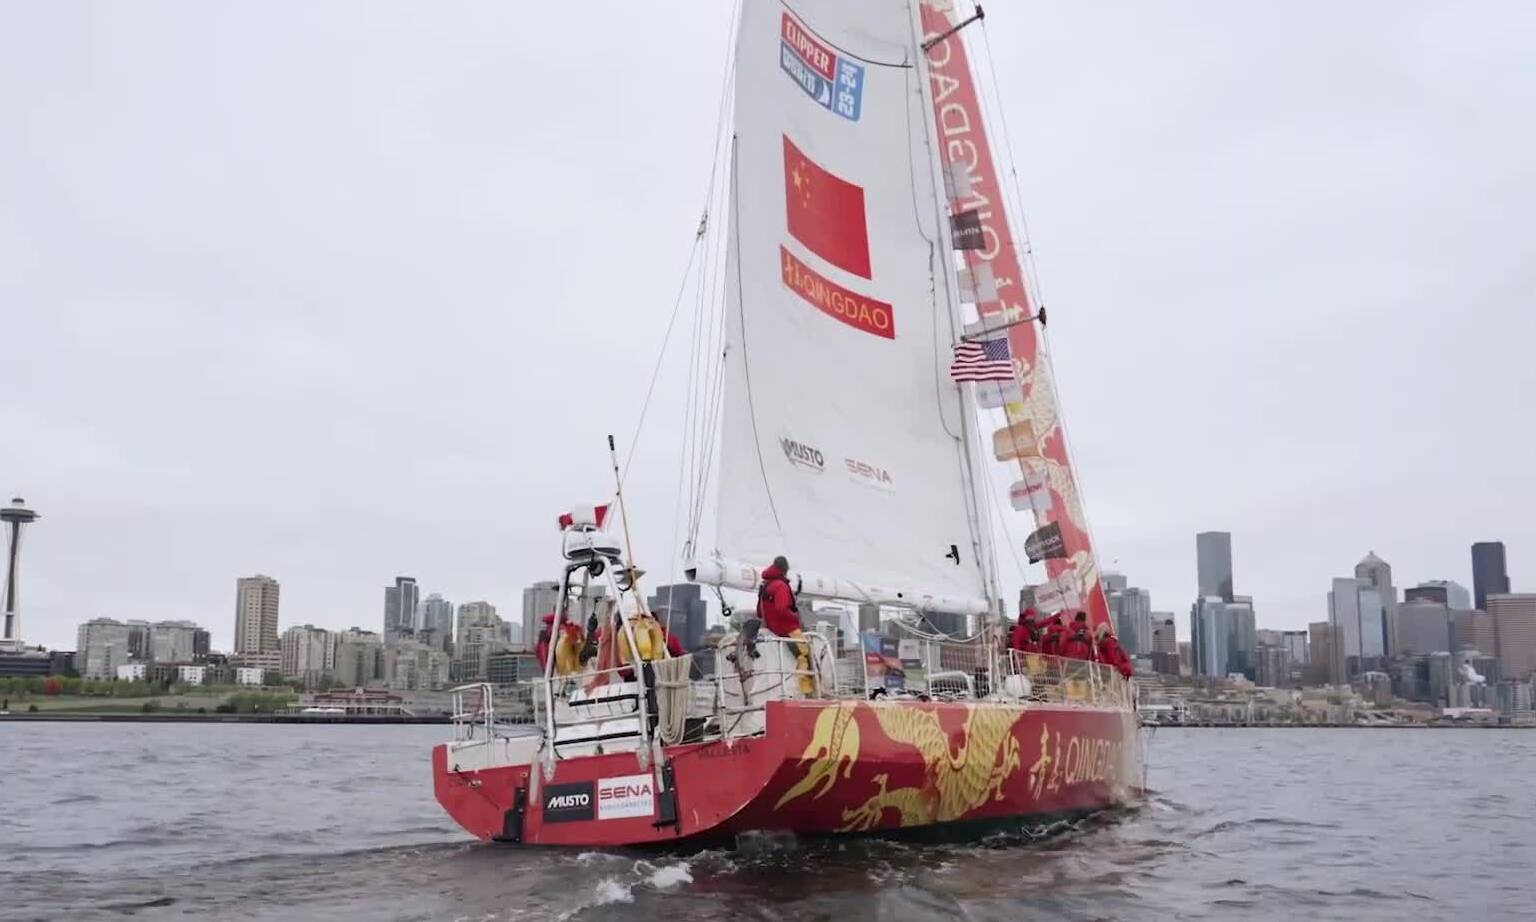 Qingdao Yacht Arrives in Seattle Securing the Second Position in Race 10